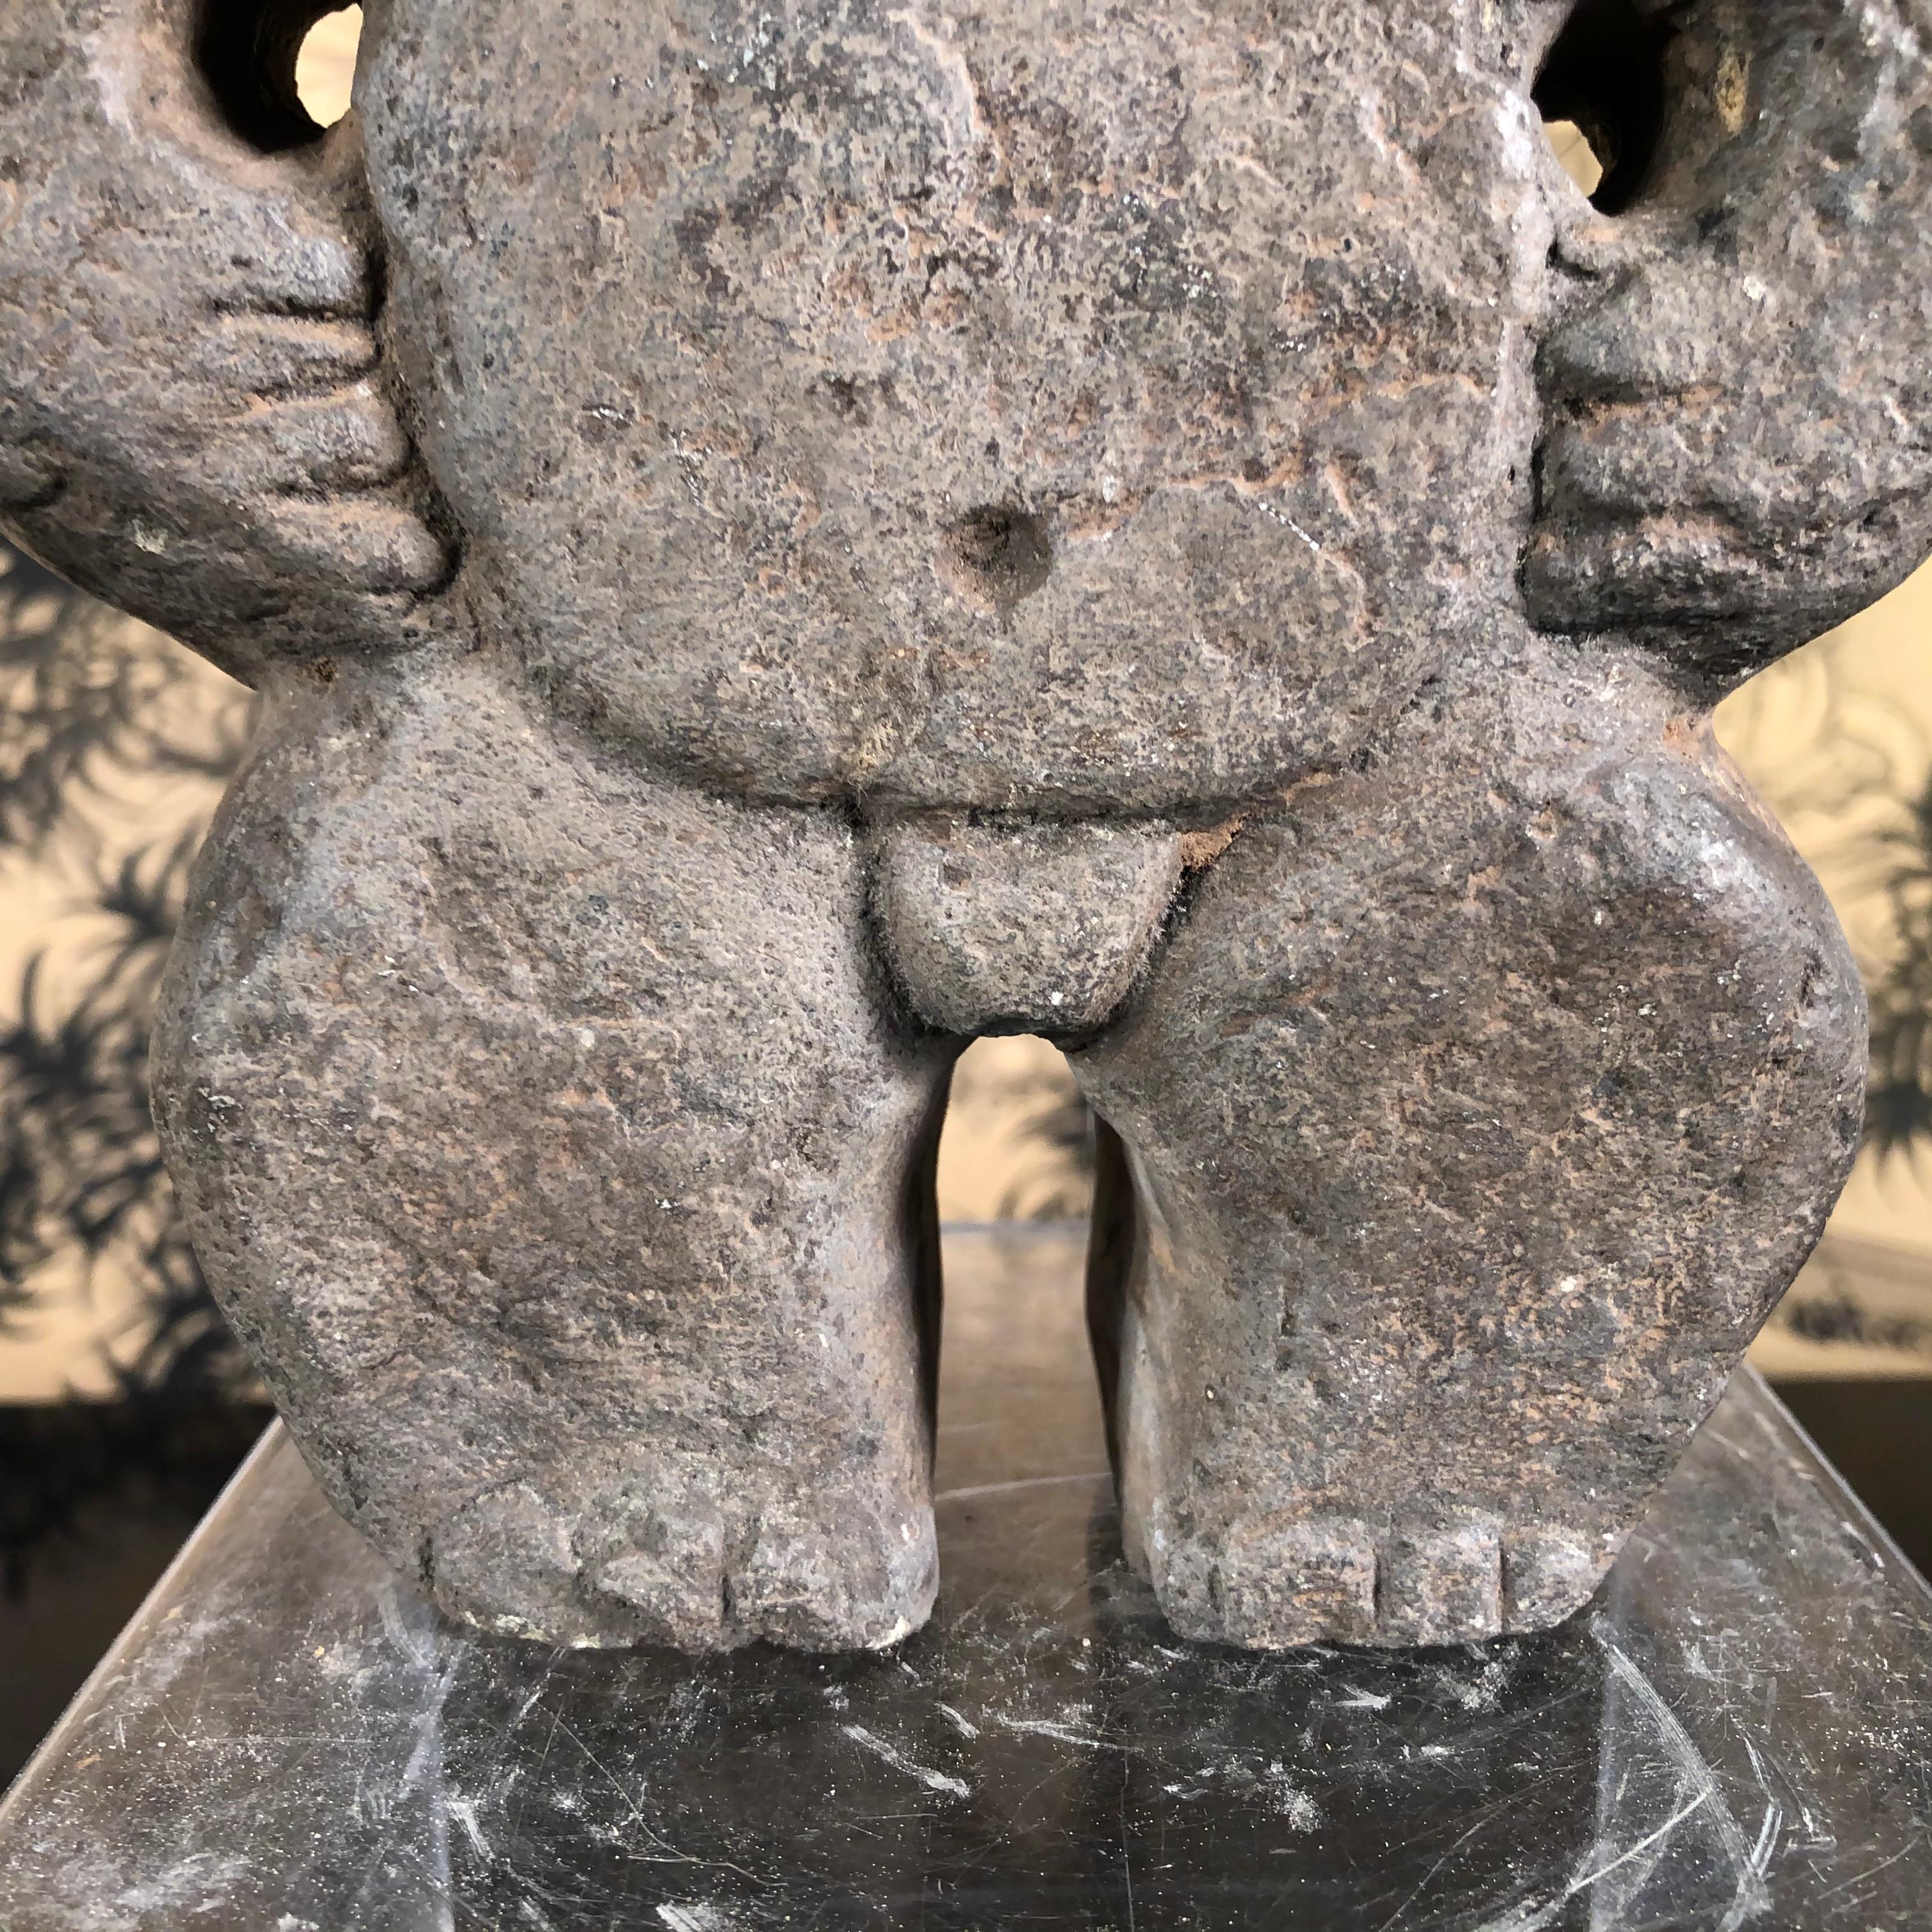 19th Century Antique Stone Ceremonial Mapuche Idol Figure from Old Chile